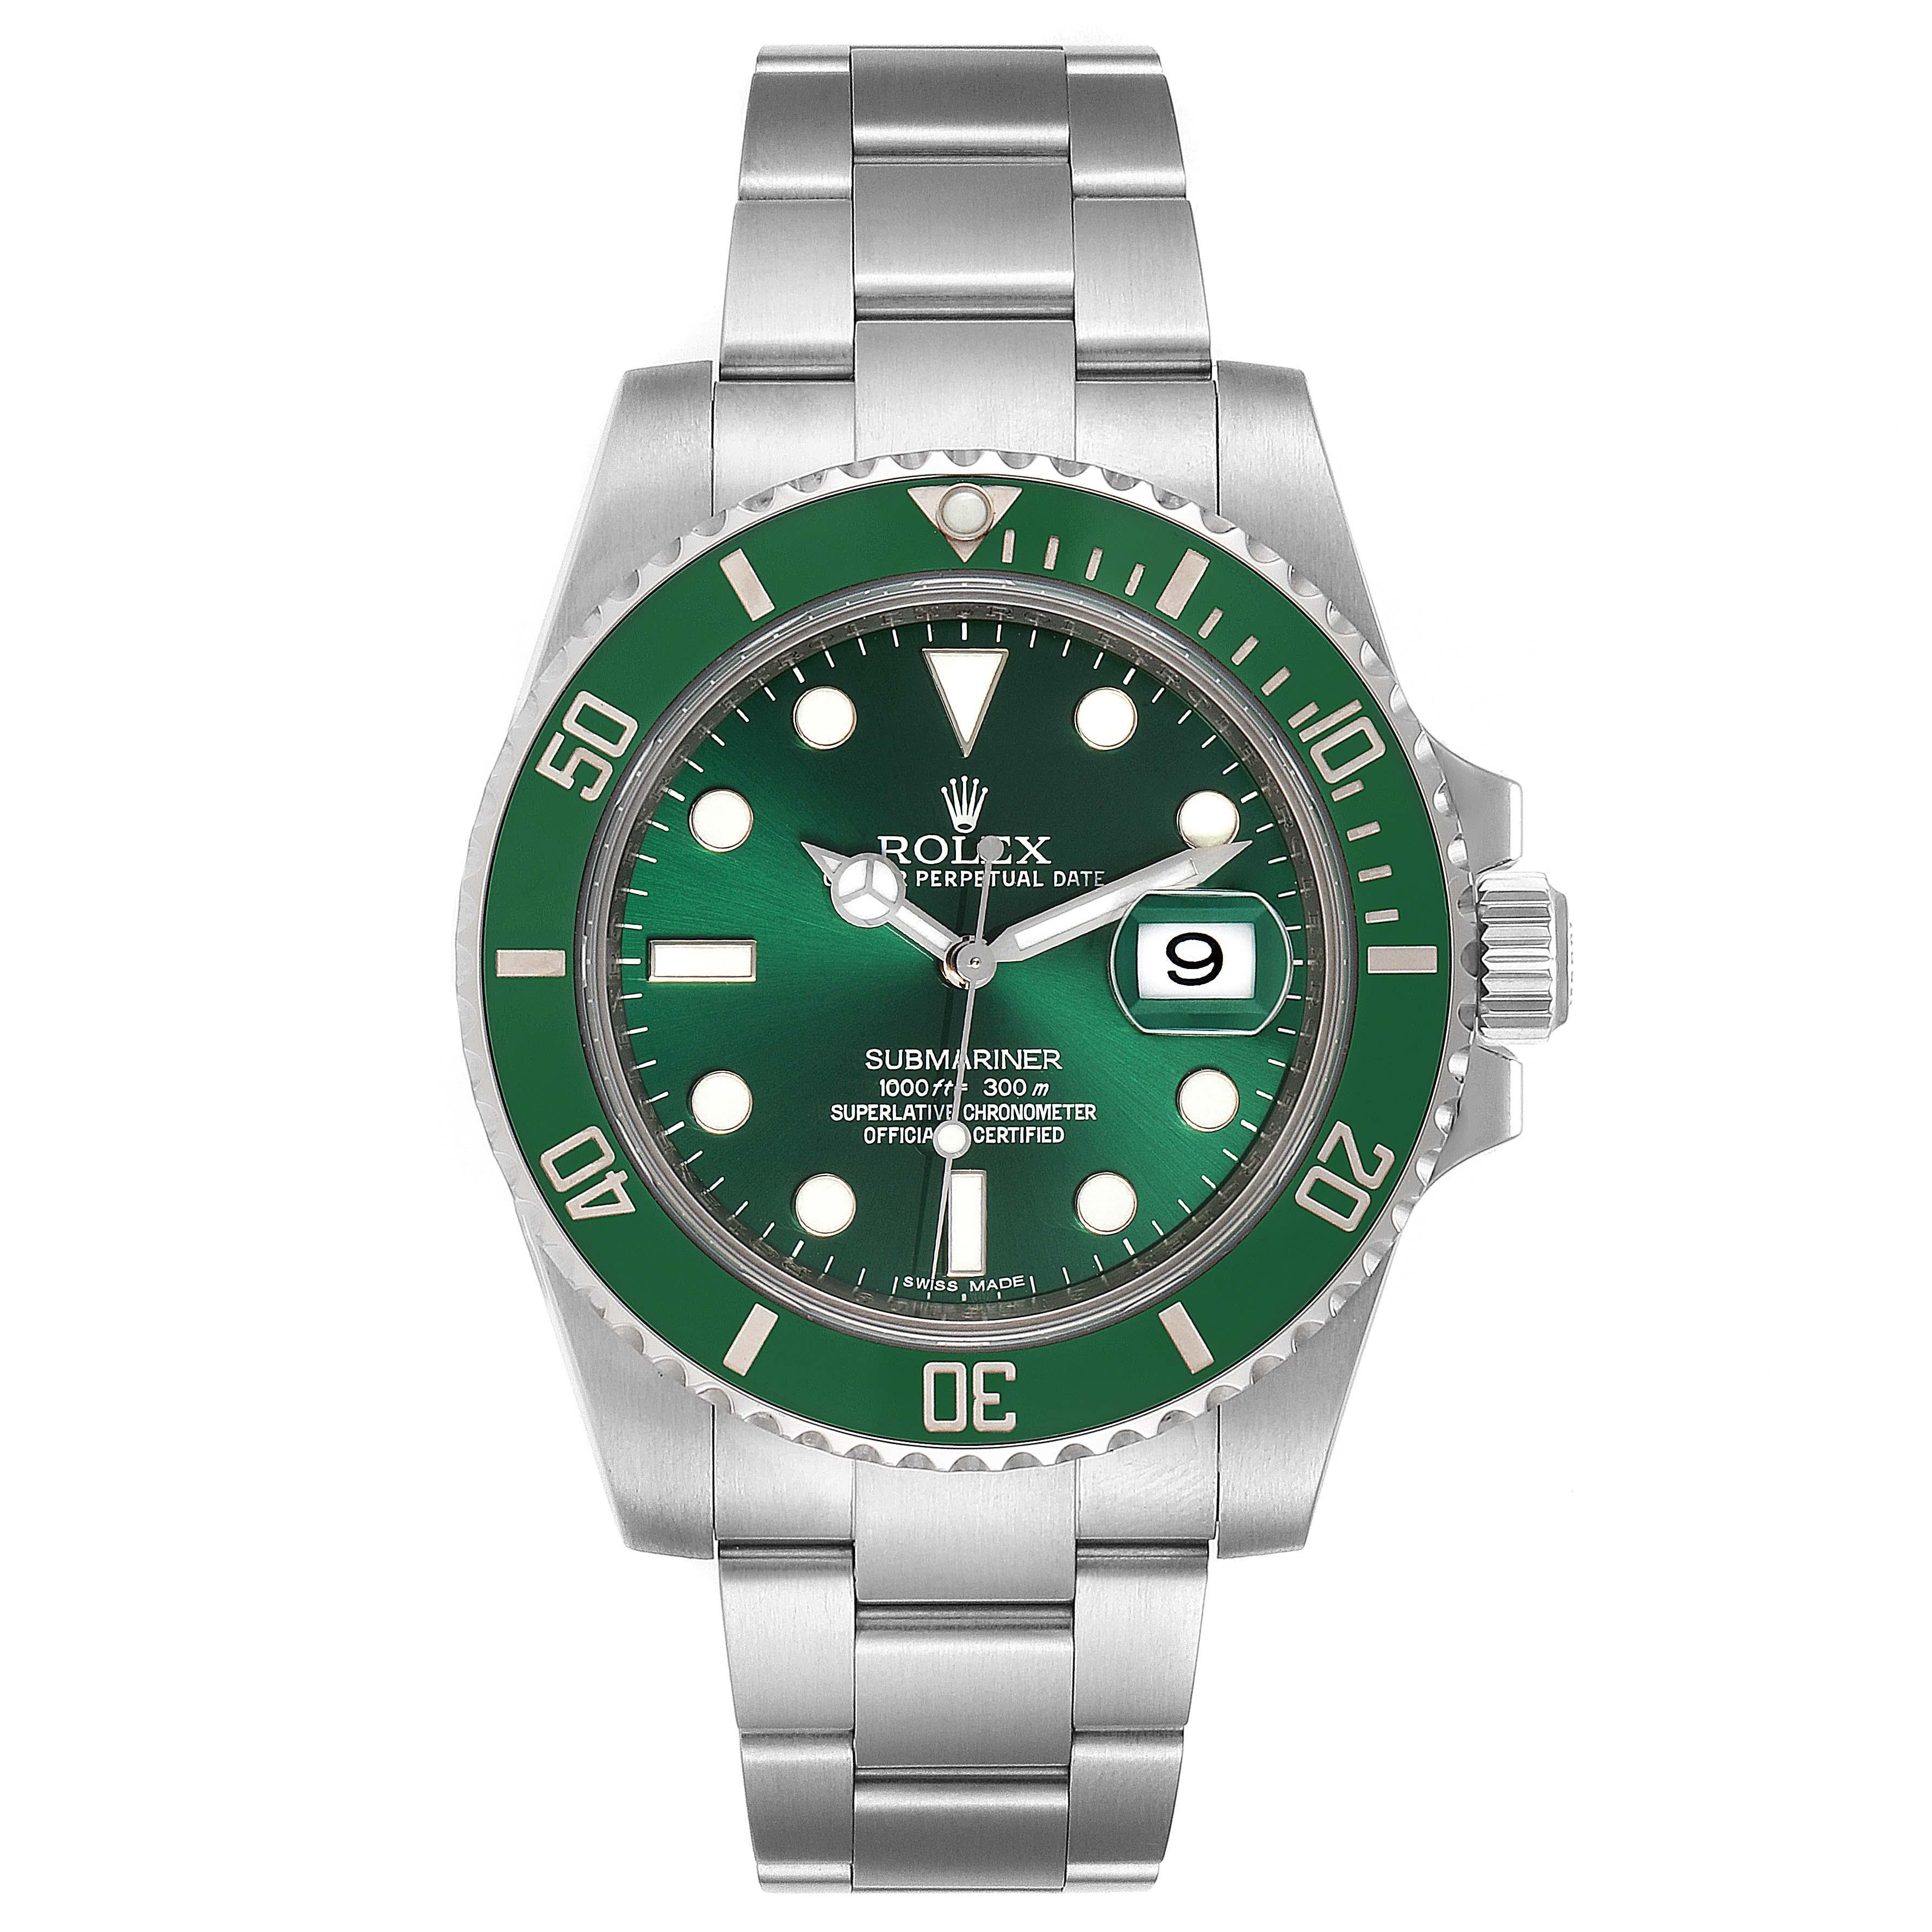 Rolex Submariner Hulk Green Dial Bezel Steel Steel Mens Watch 116610LV. Officially certified chronometer self-winding movement. Stainless steel case 40 mm in diameter. Rolex logo on a crown. Special time-lapse unidirectional rotating green ceramic